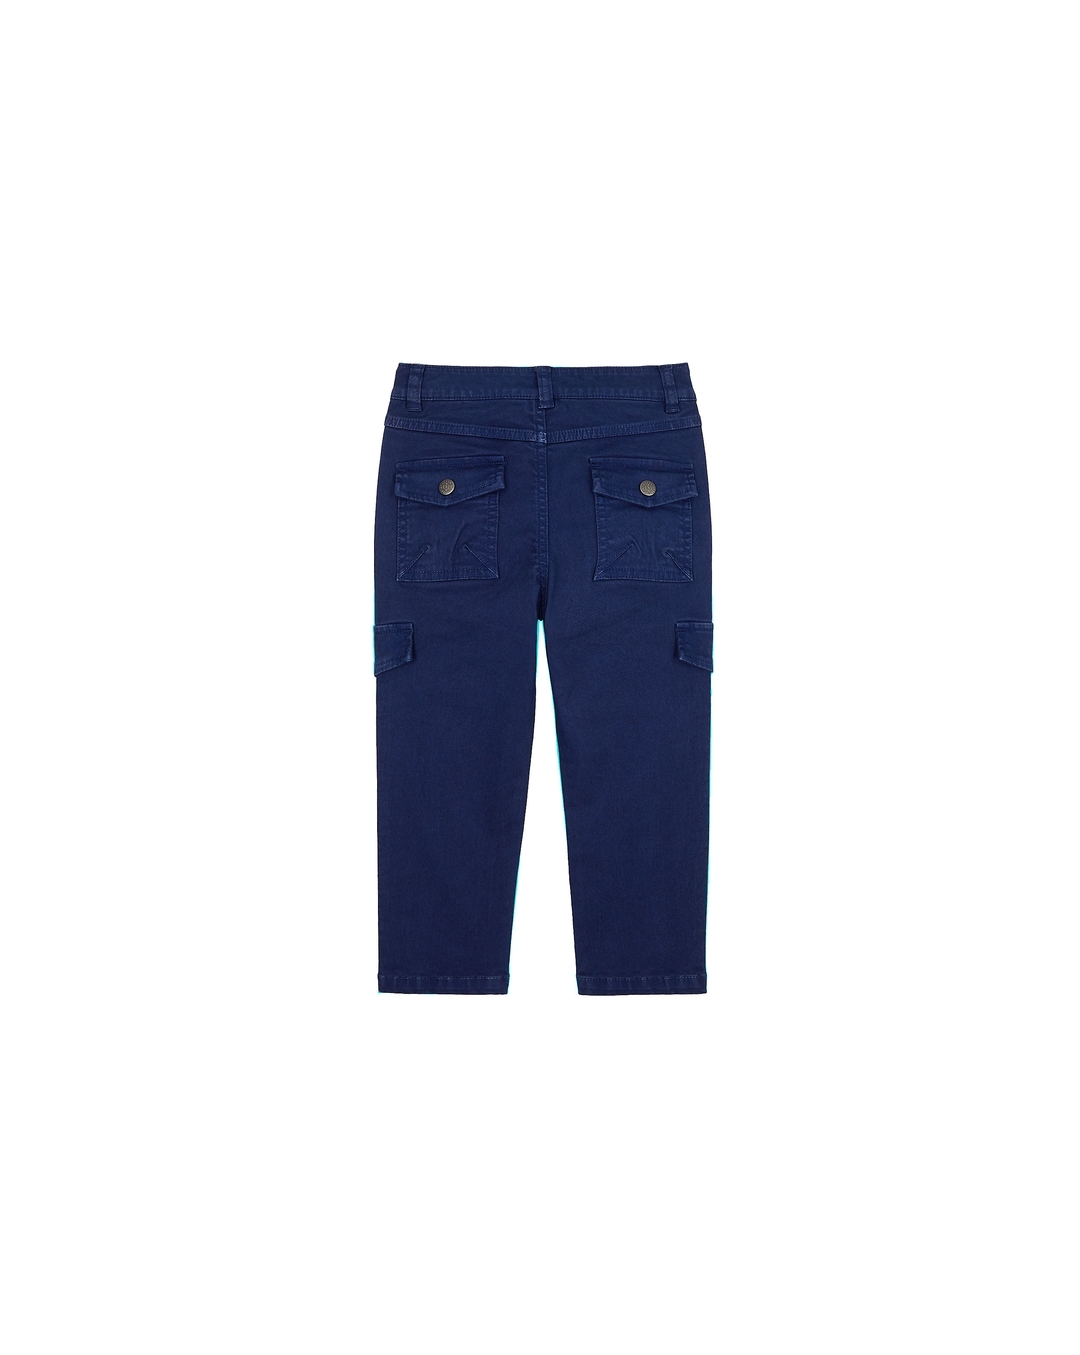 Buy Blue Trousers  Pants for Boys by Marks  Spencer Online  Ajiocom